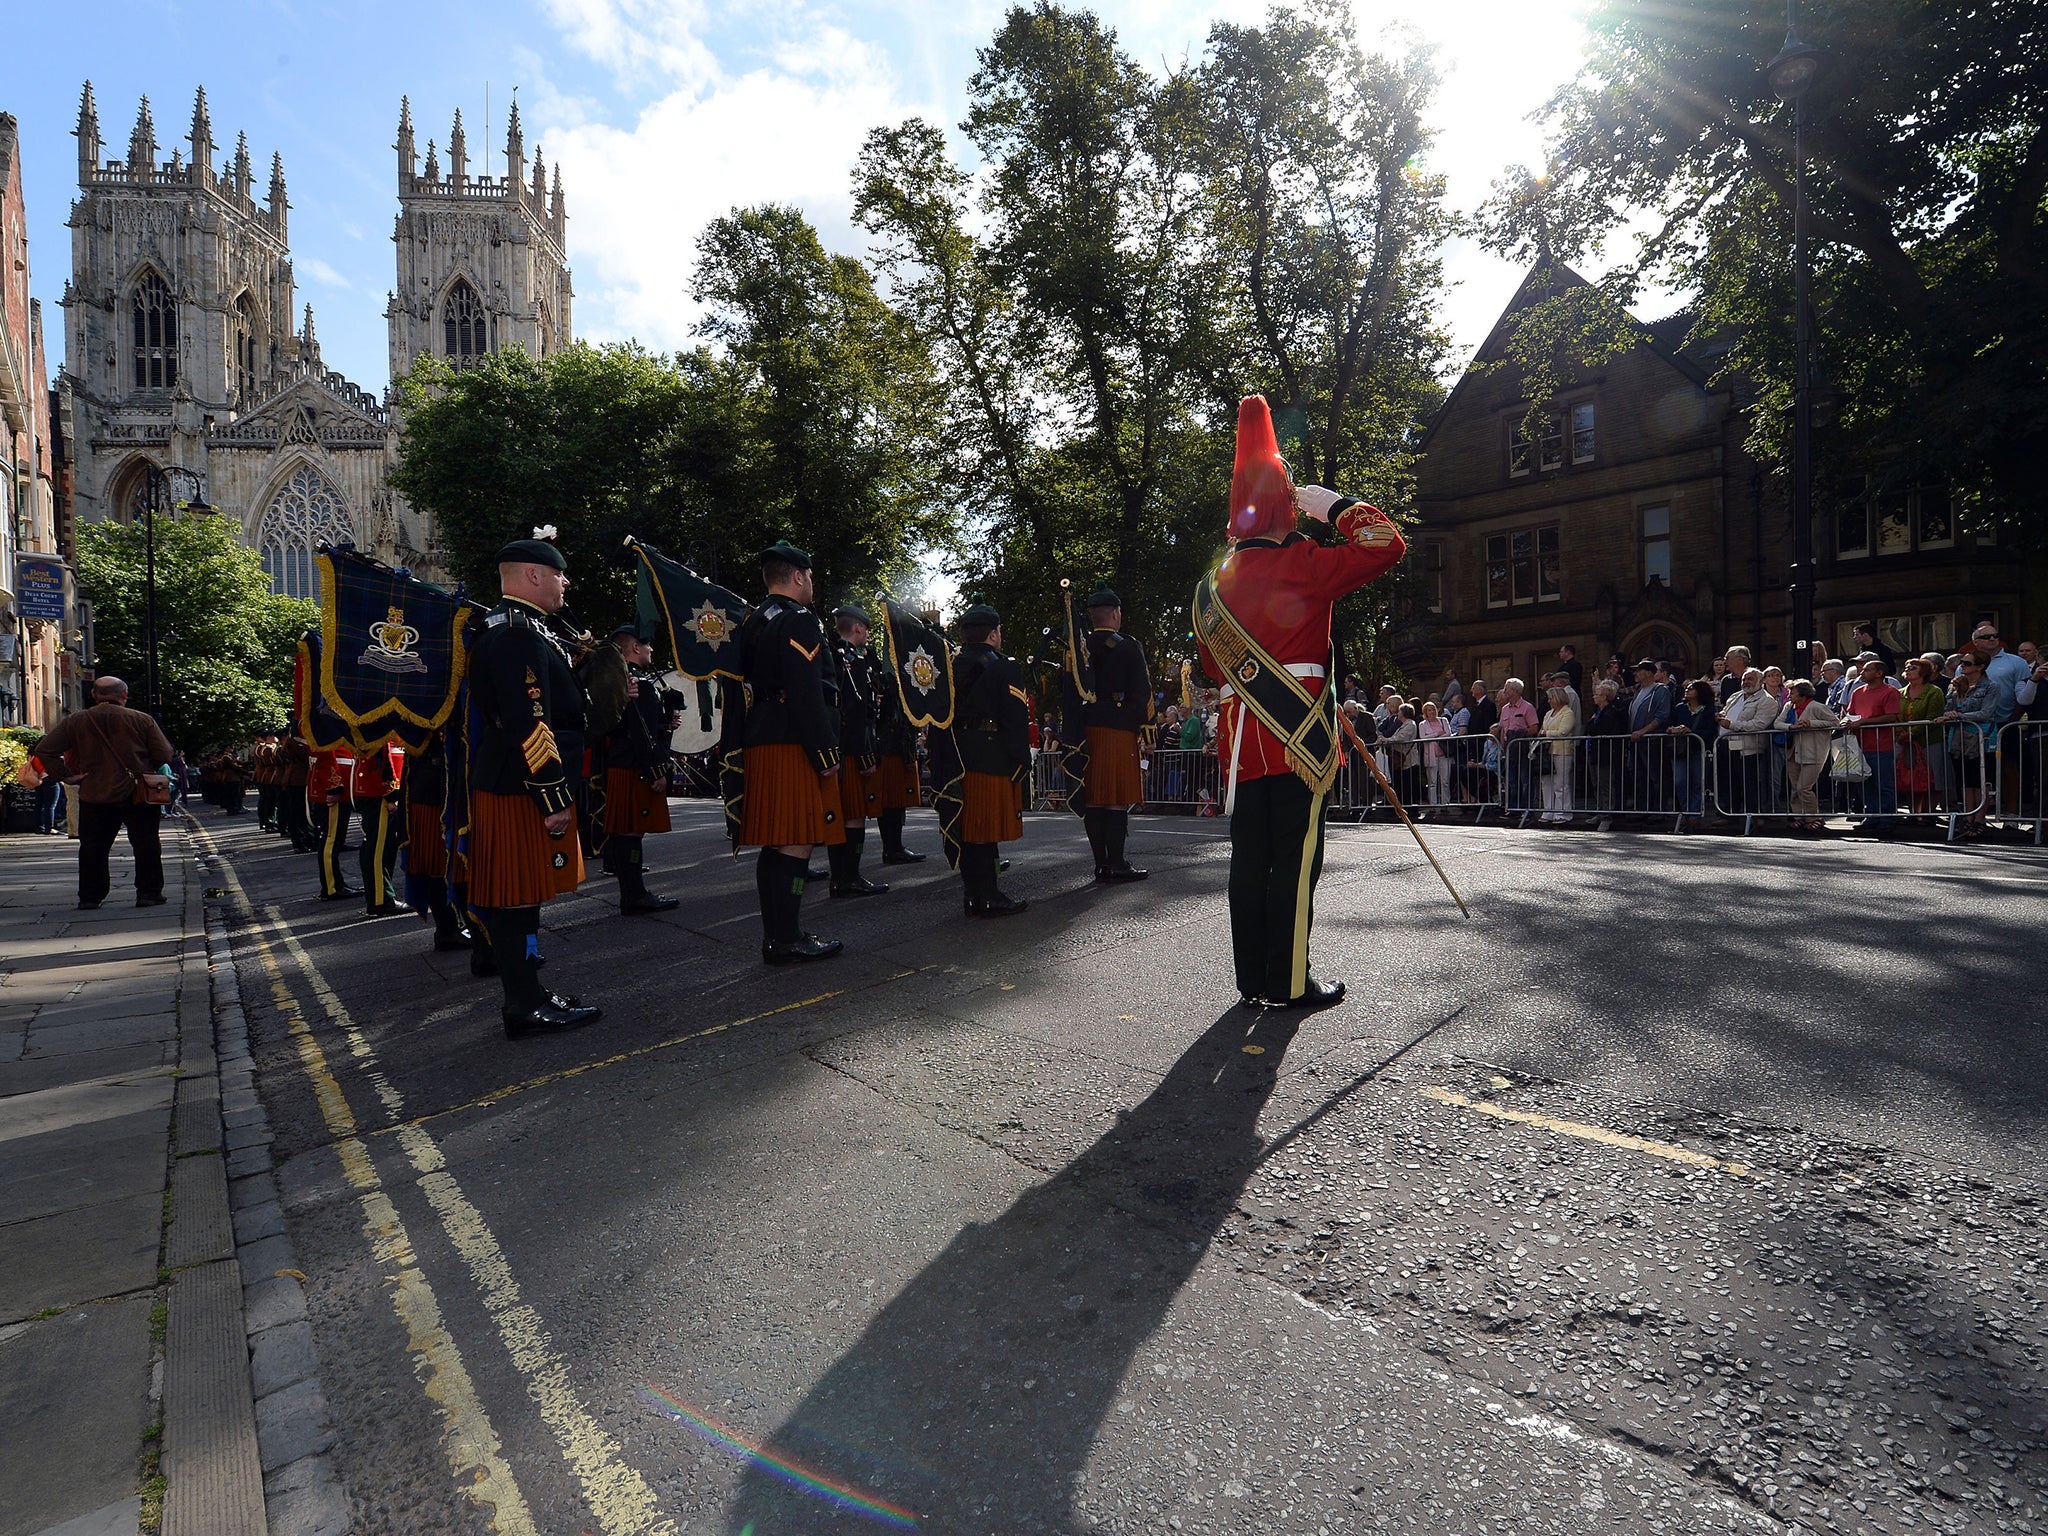 The Royal Dragoons Guard march past York Minster as they parade through the City ahead of a service in the Minster as part of the WWI Commemorations